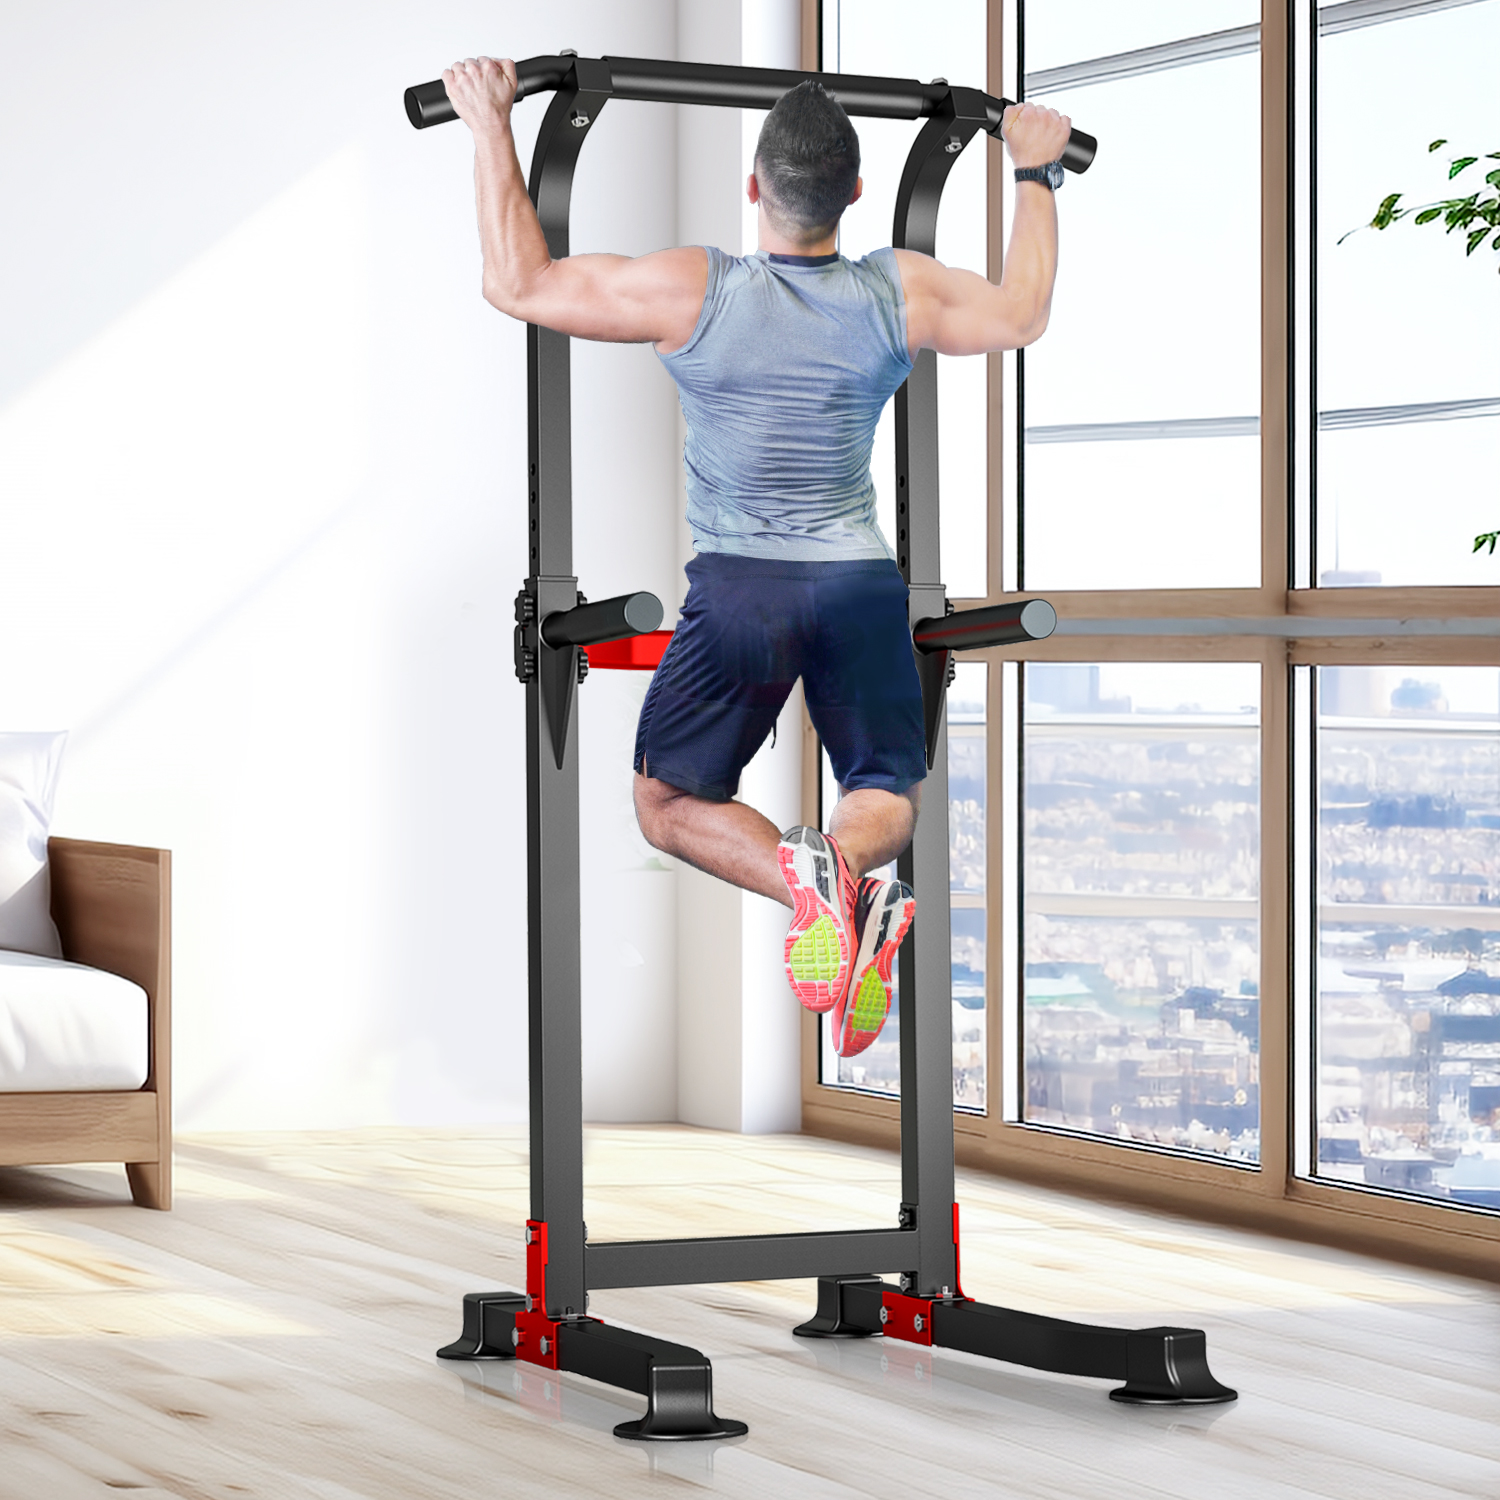 Ainfox Power Tower Pull Up Bar, Pull Up Bar Station Workout Dip Station Height Adjustable Strength Training Equipment For Fitness For Home 330 Weight Capacity - image 2 of 8